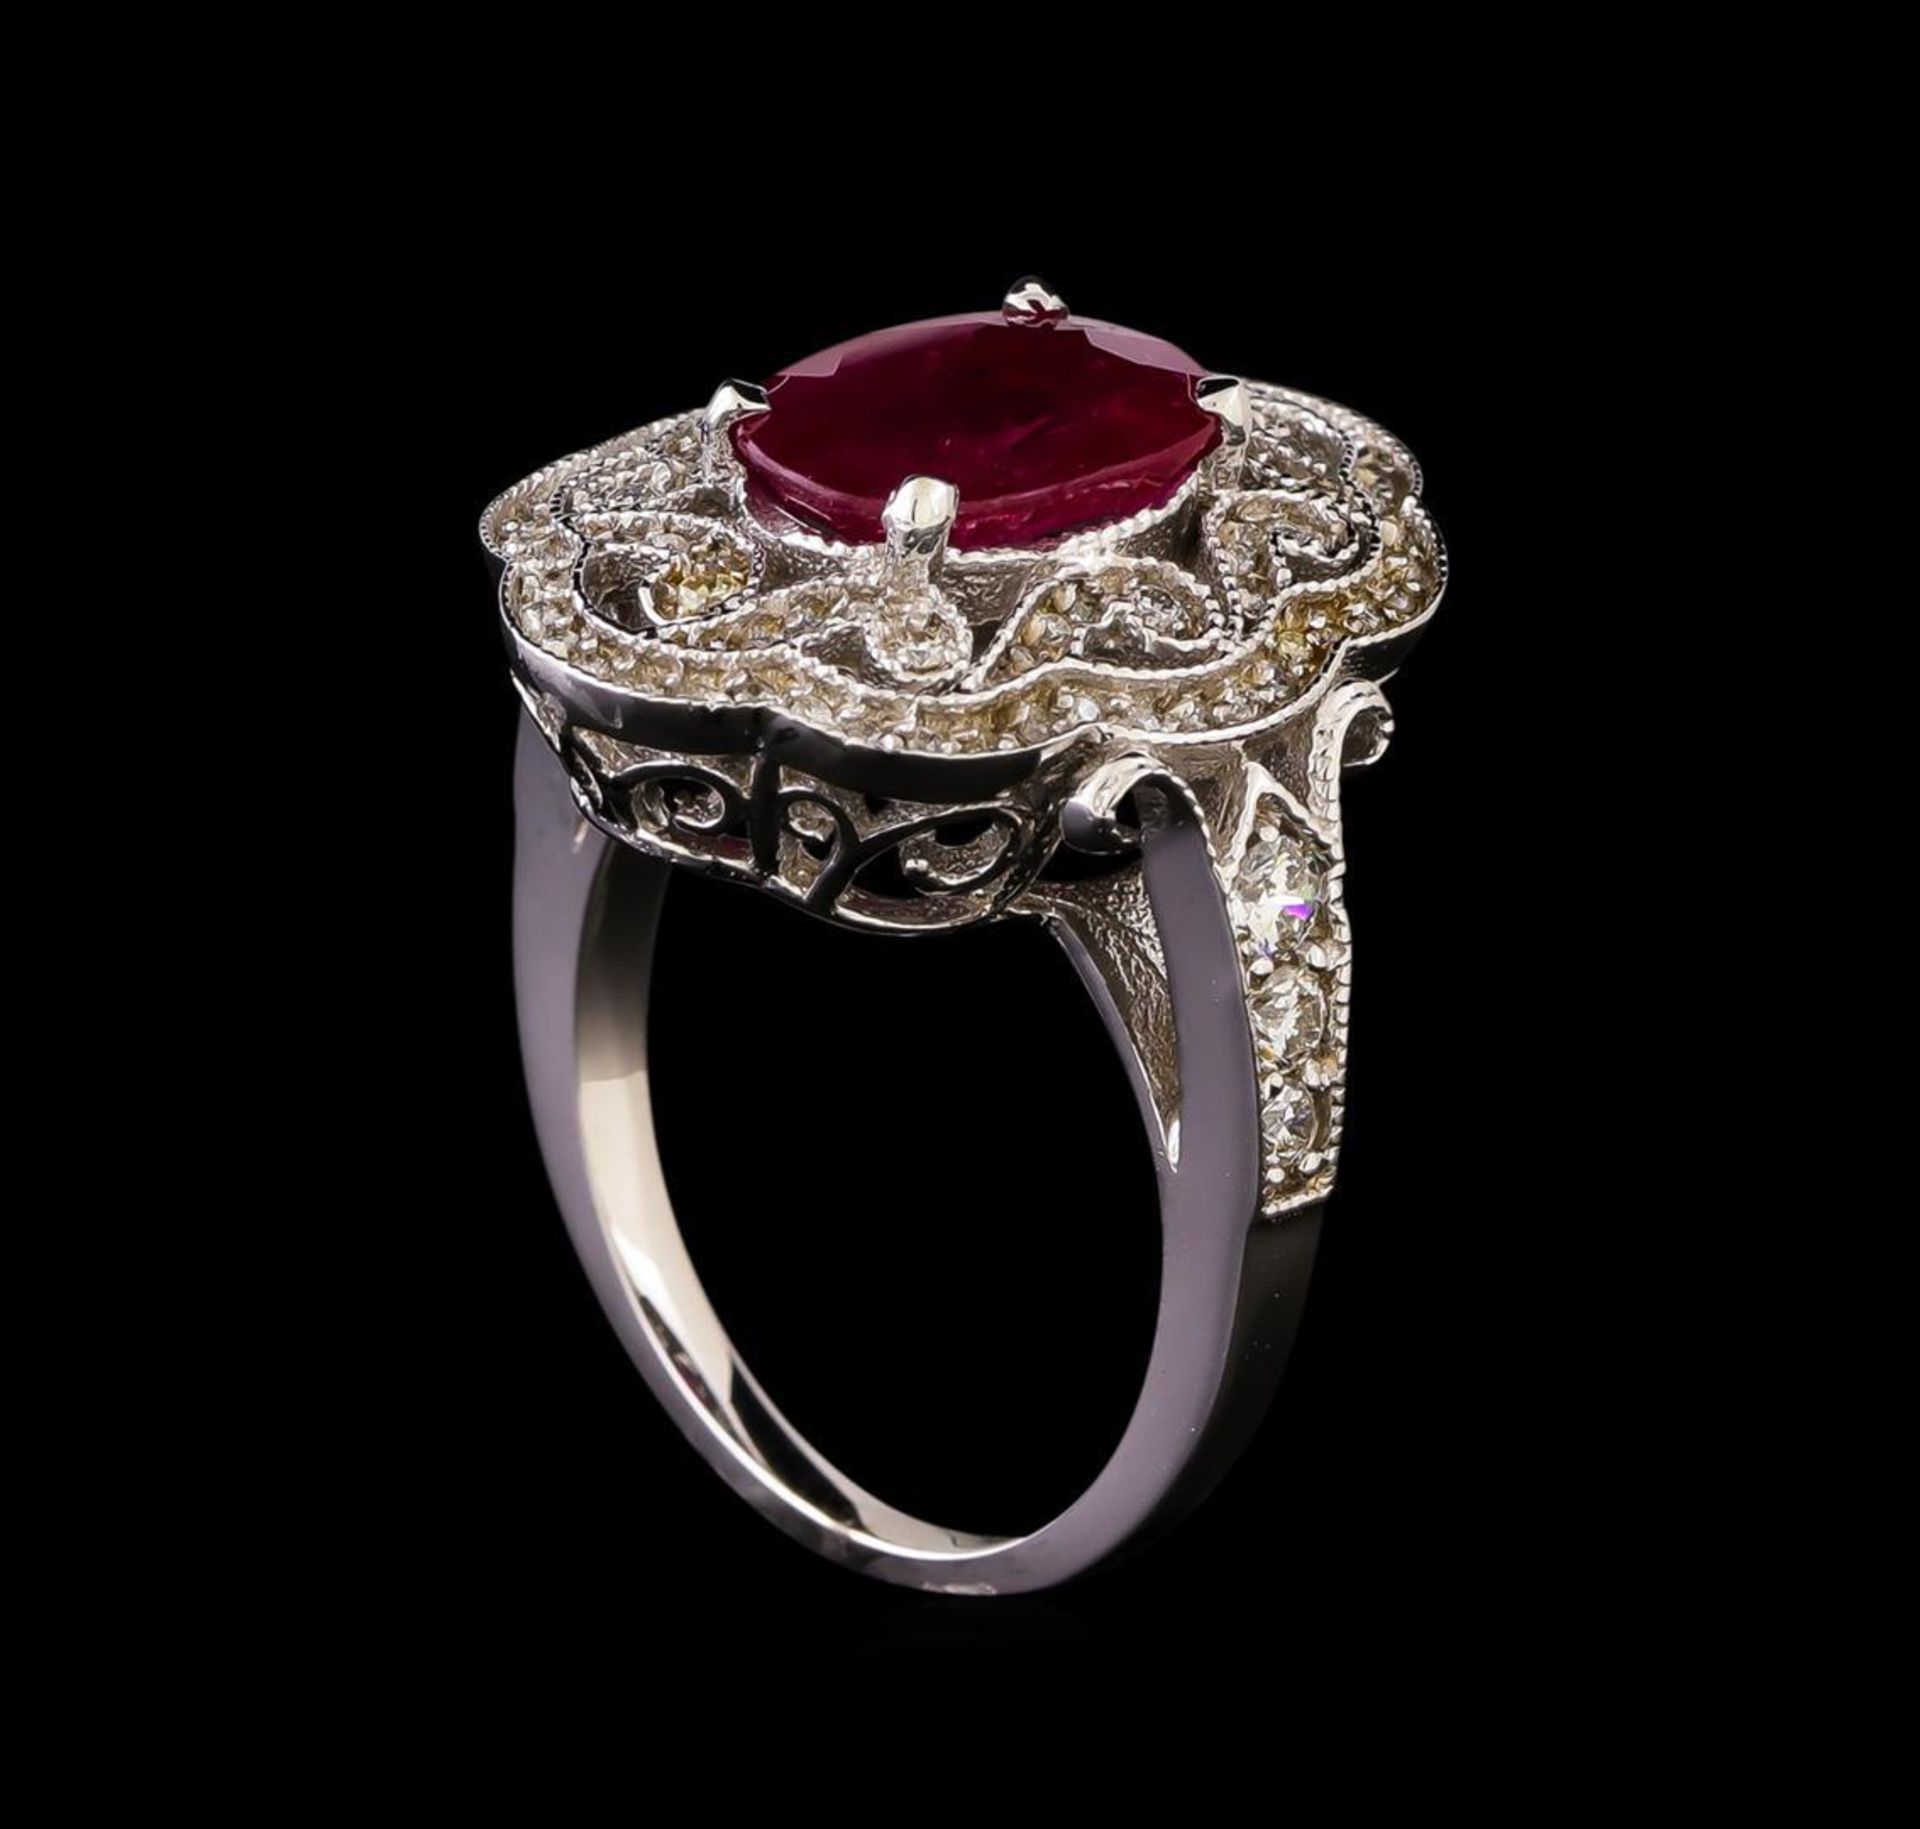 GIA Cert 2.53 ctw Ruby and Diamond Ring - 14KT White Gold - Image 4 of 7